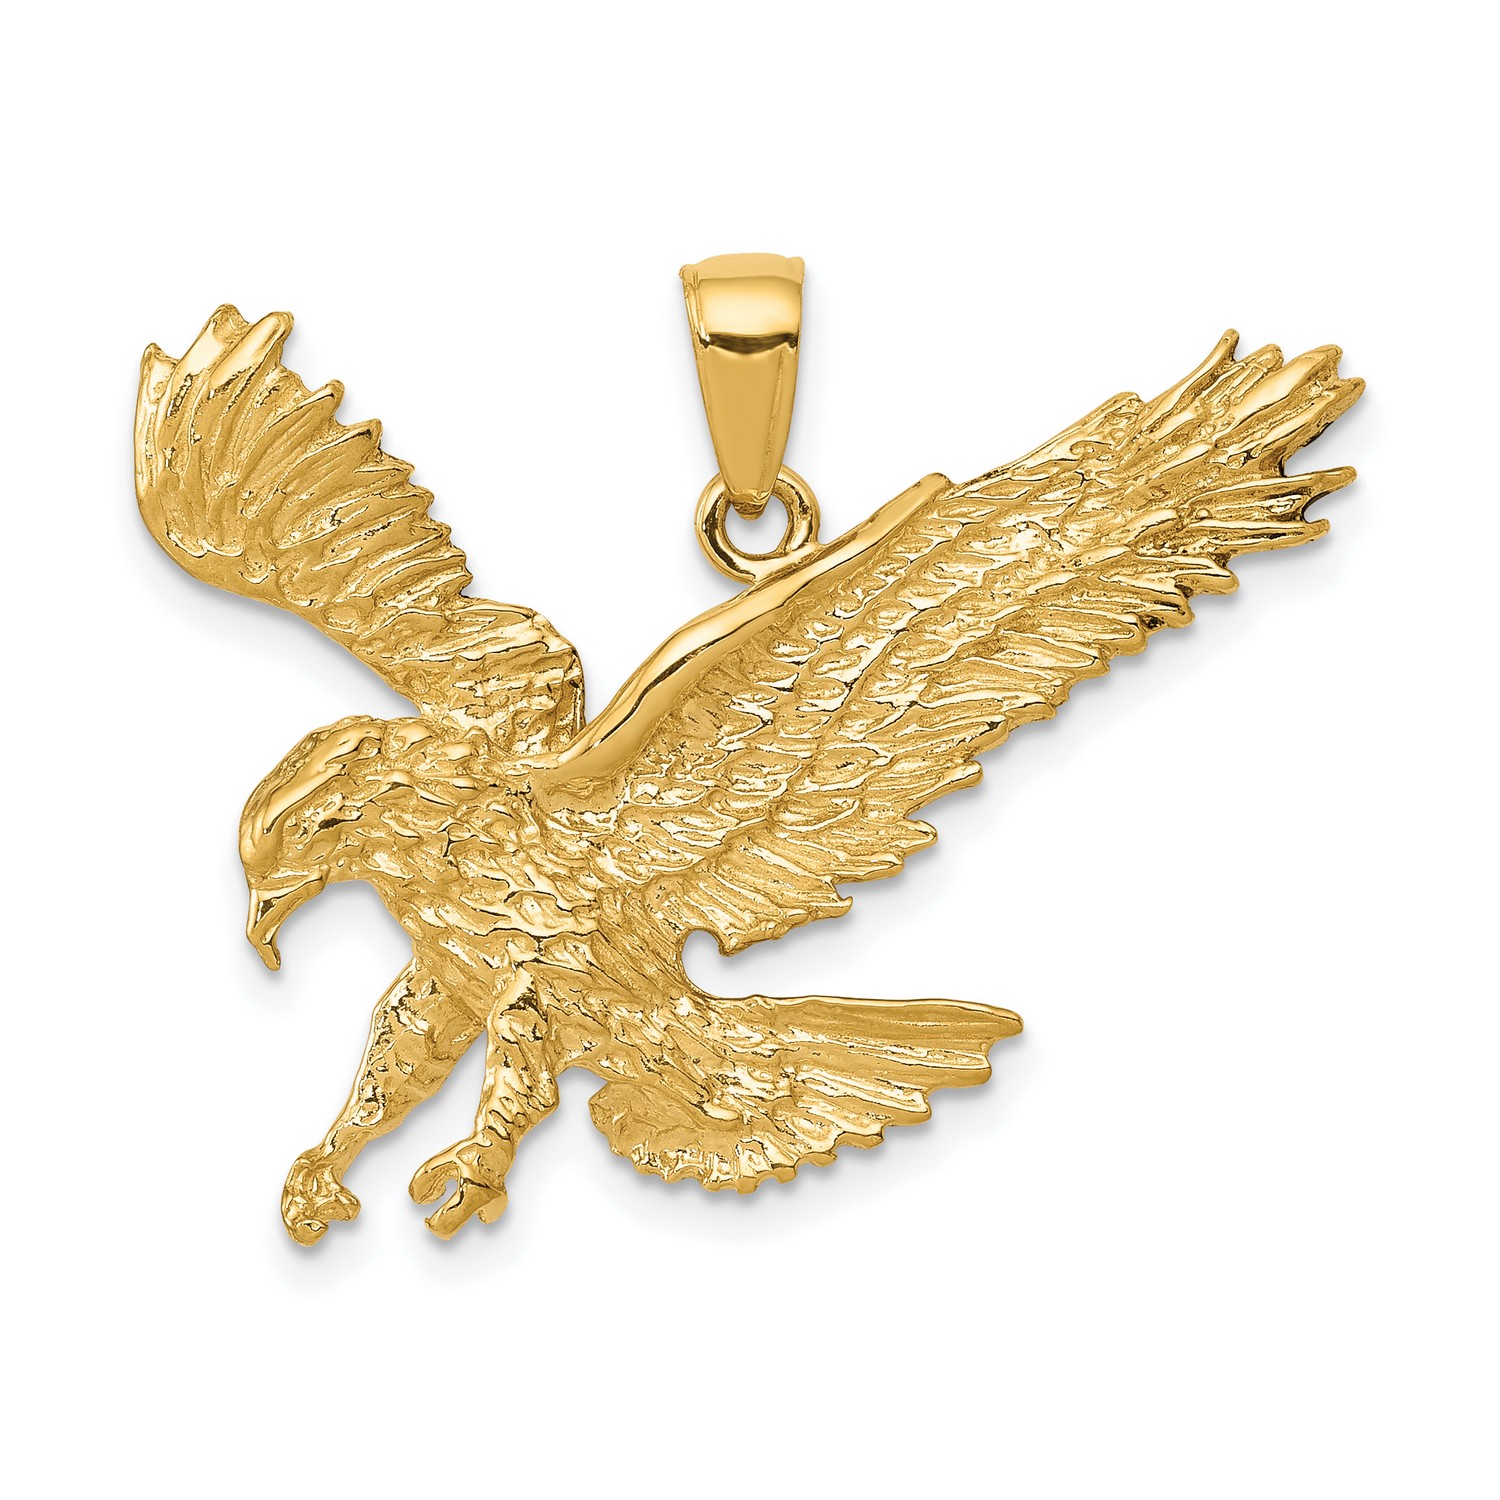 Pre-owned Jewelry Stores Network 14k Yellow Gold Textured Eagle Landing Charm Pendant